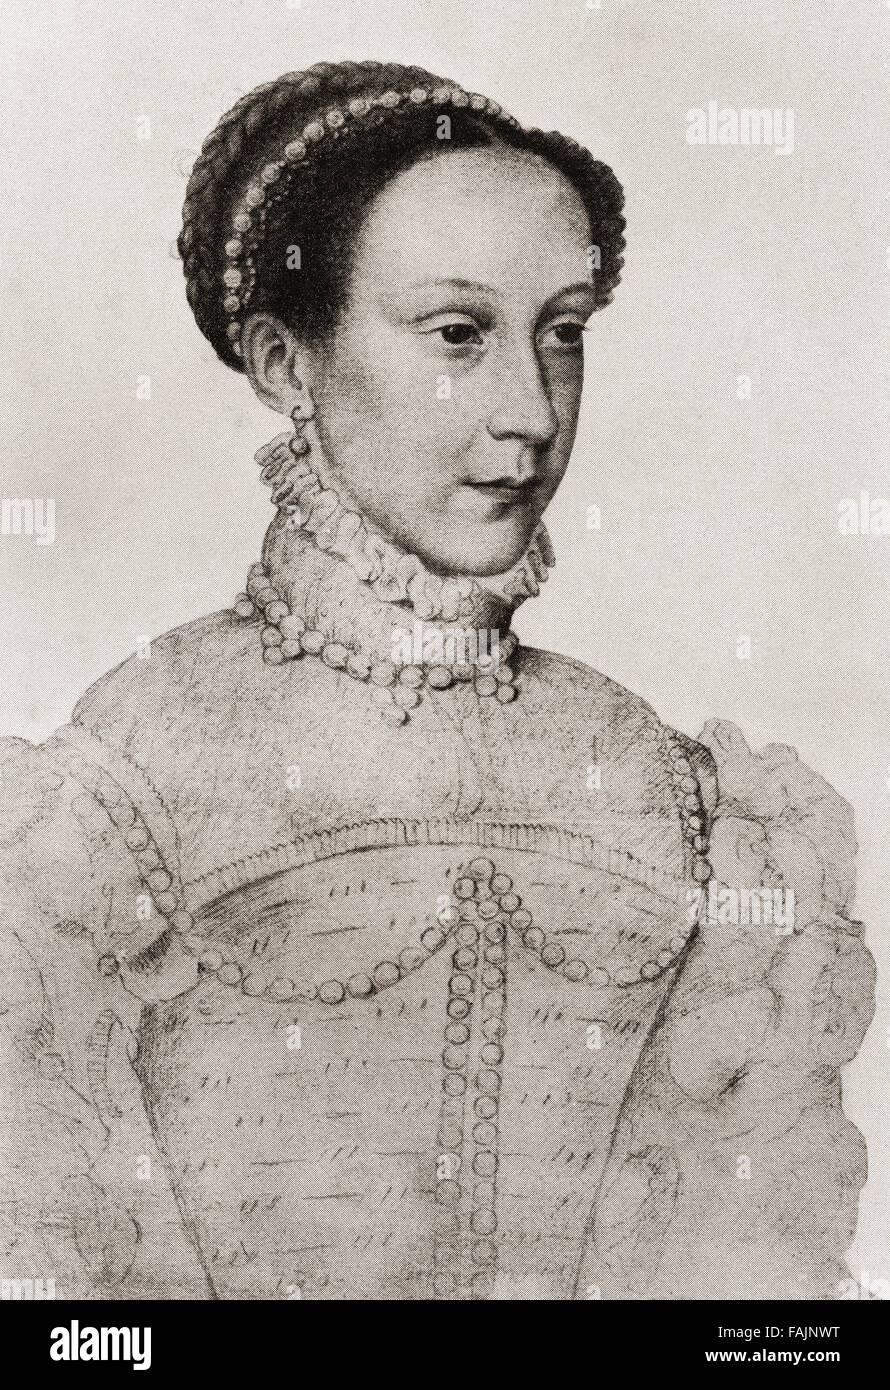 Mary, Queen of Scots, 1542 – 1587 aka Mary Stuart or Mary I of Scotland.  Queen of Scotland and Queen consort of France.  After a drawing attributed to François Clouet. Stock Photo